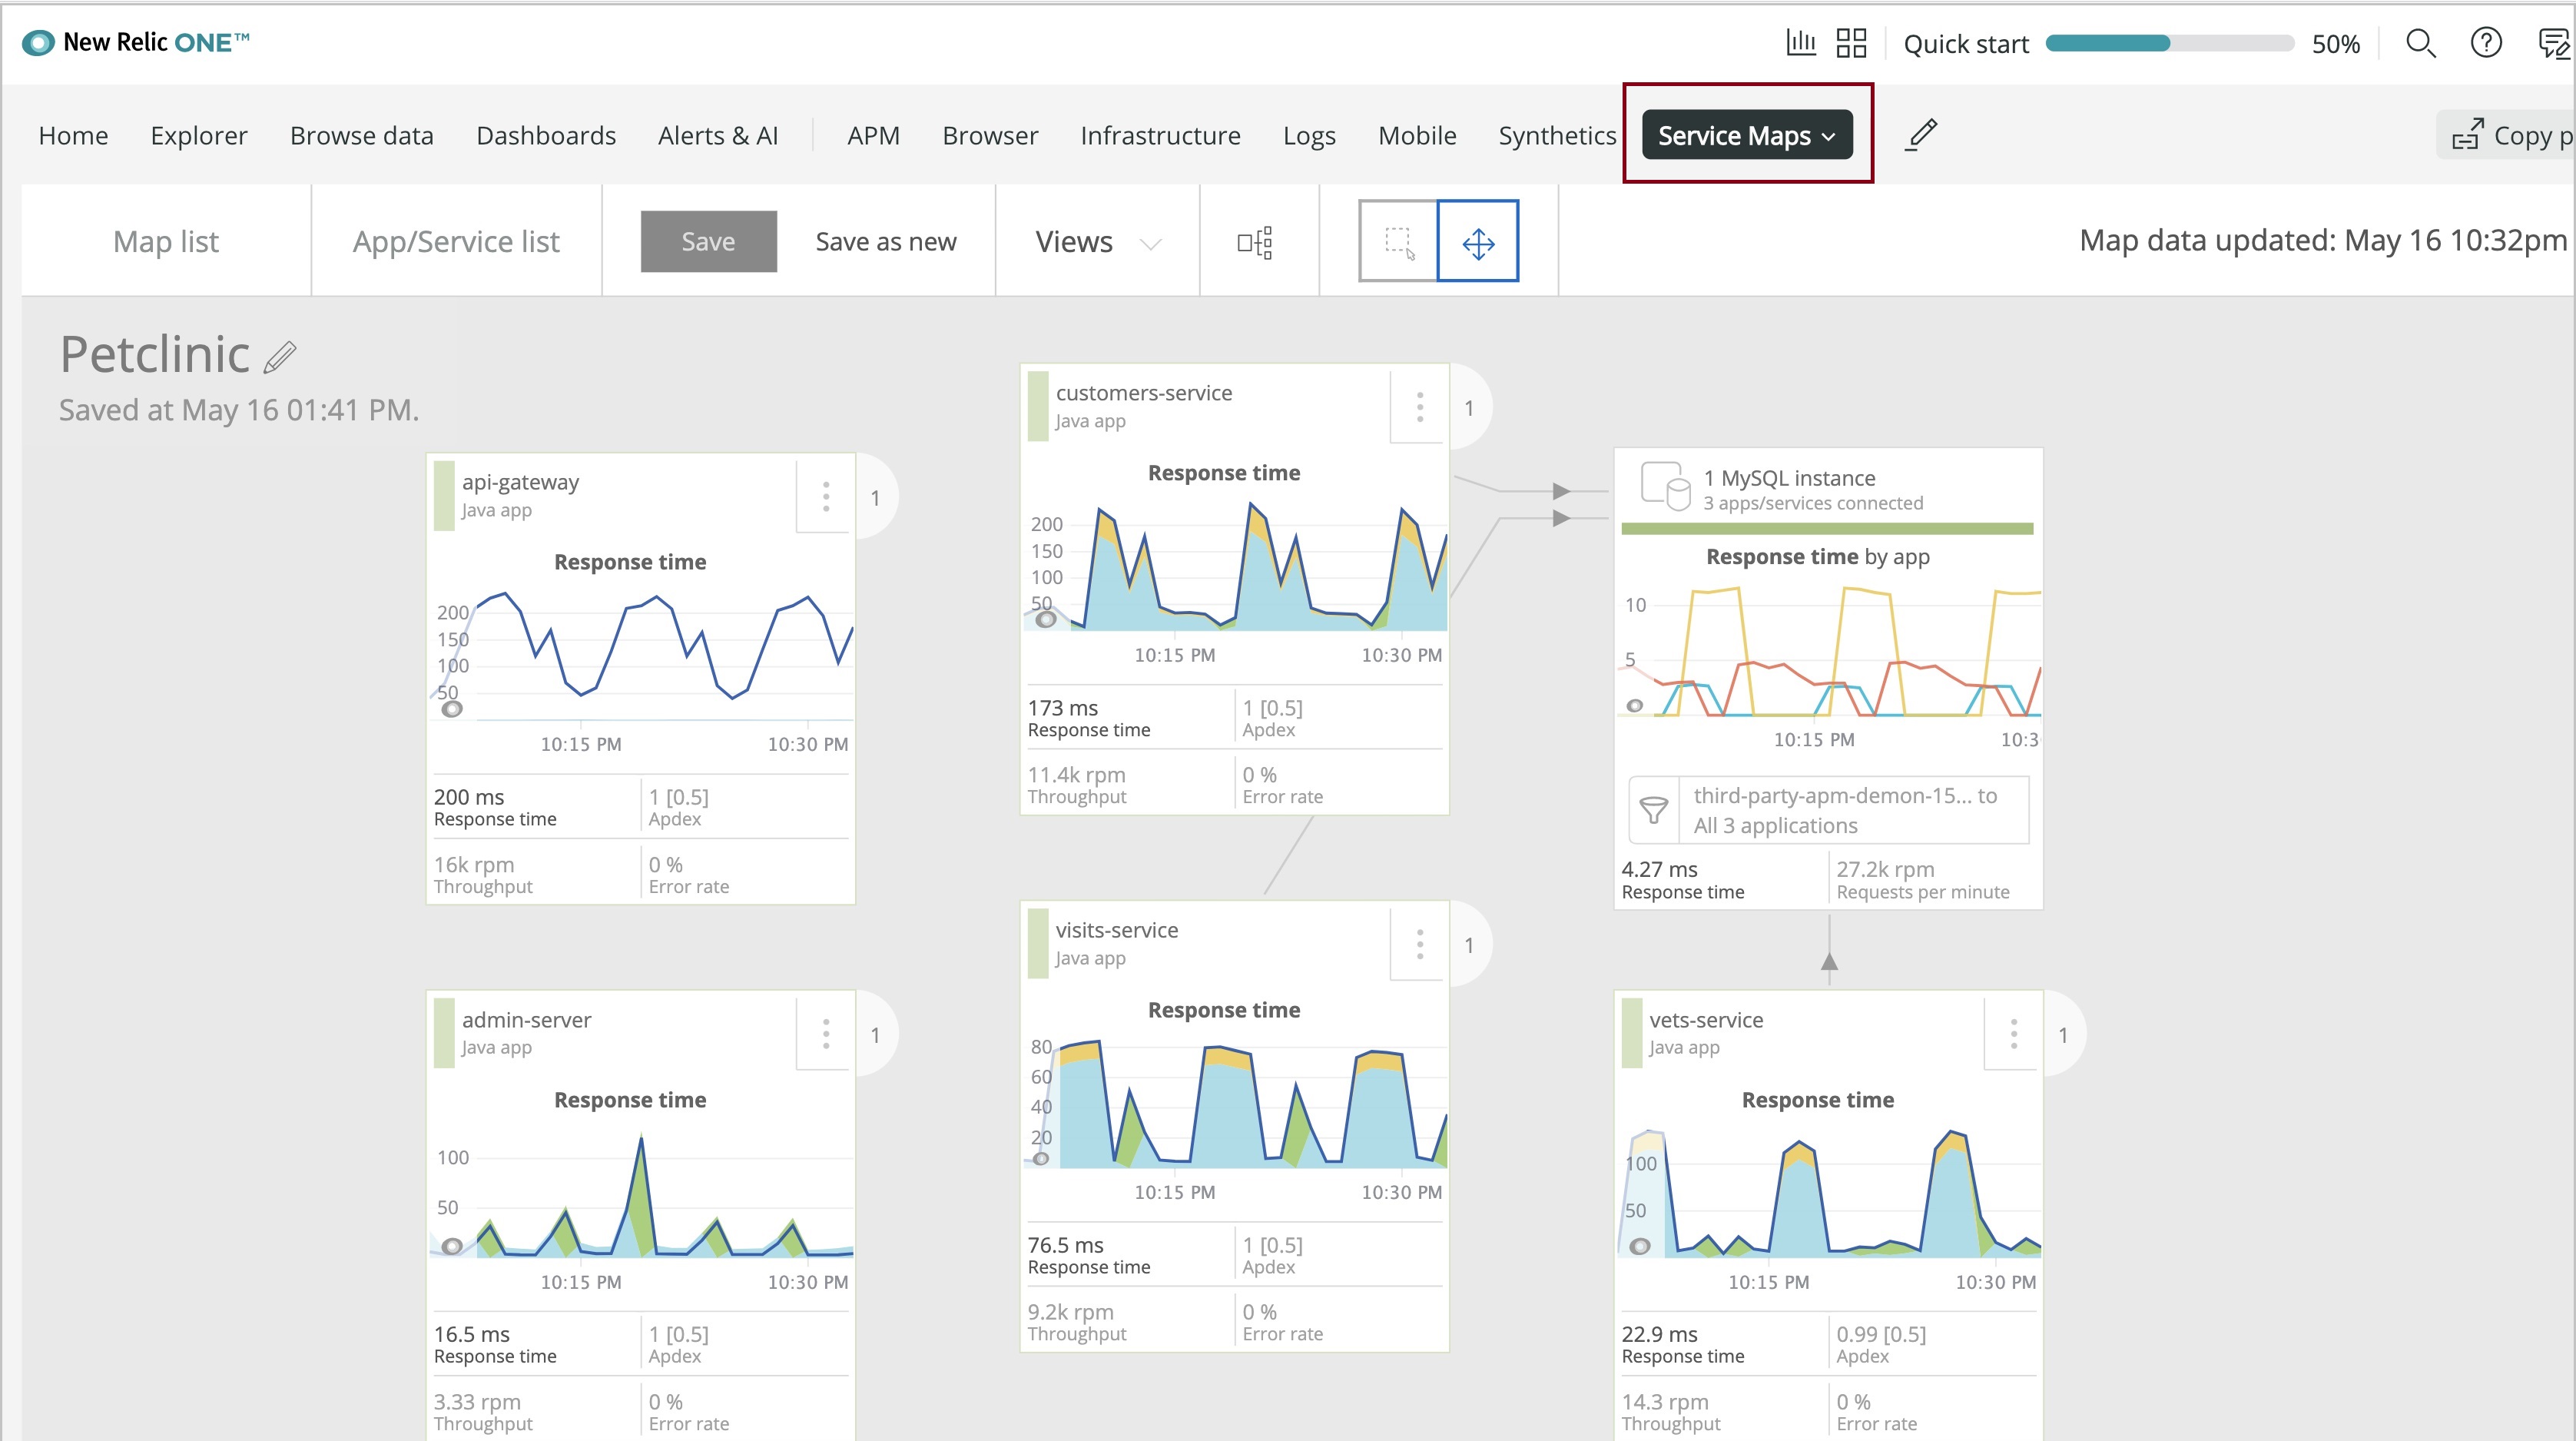 Screenshot of the New Relic dashboard showing the Service Map page.